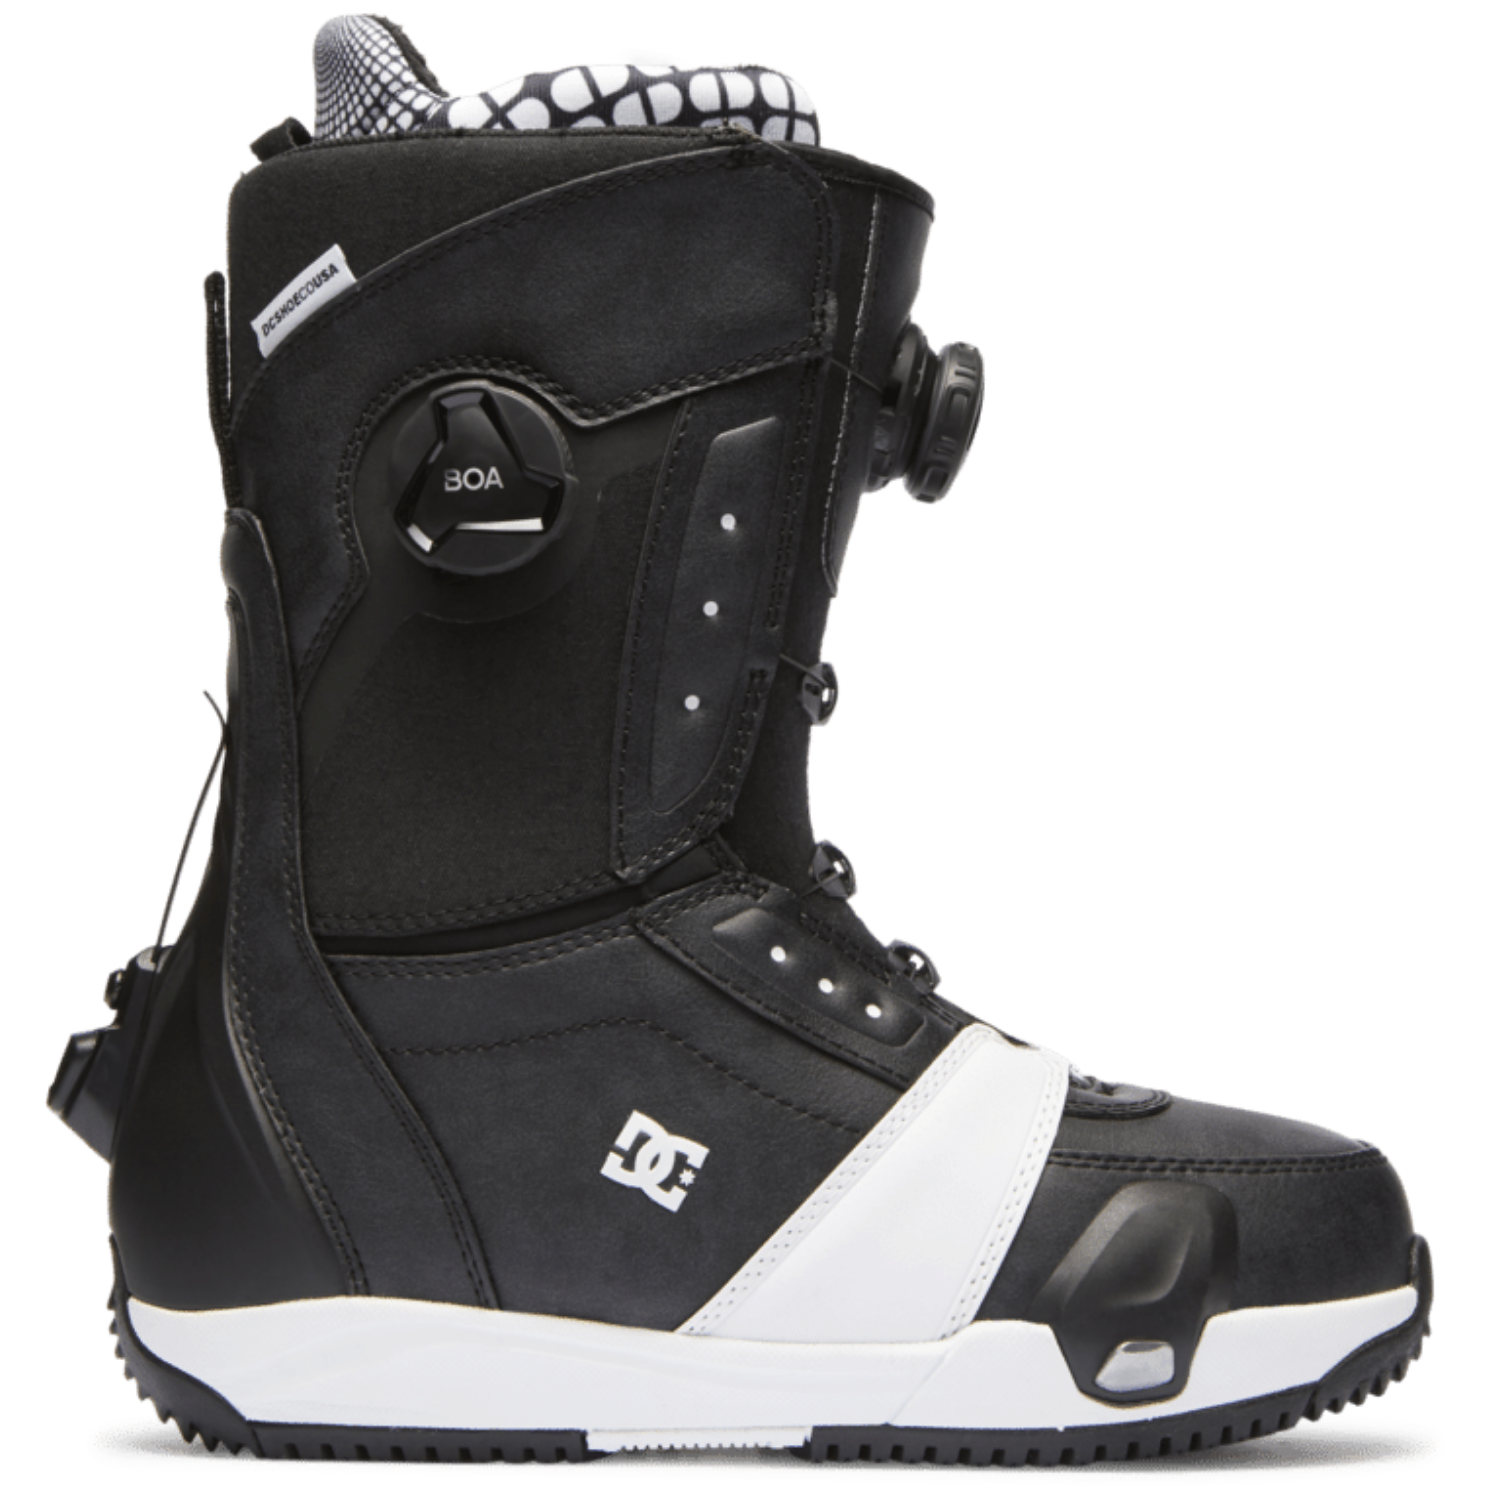 Buy > snowboard boots and board > in stock